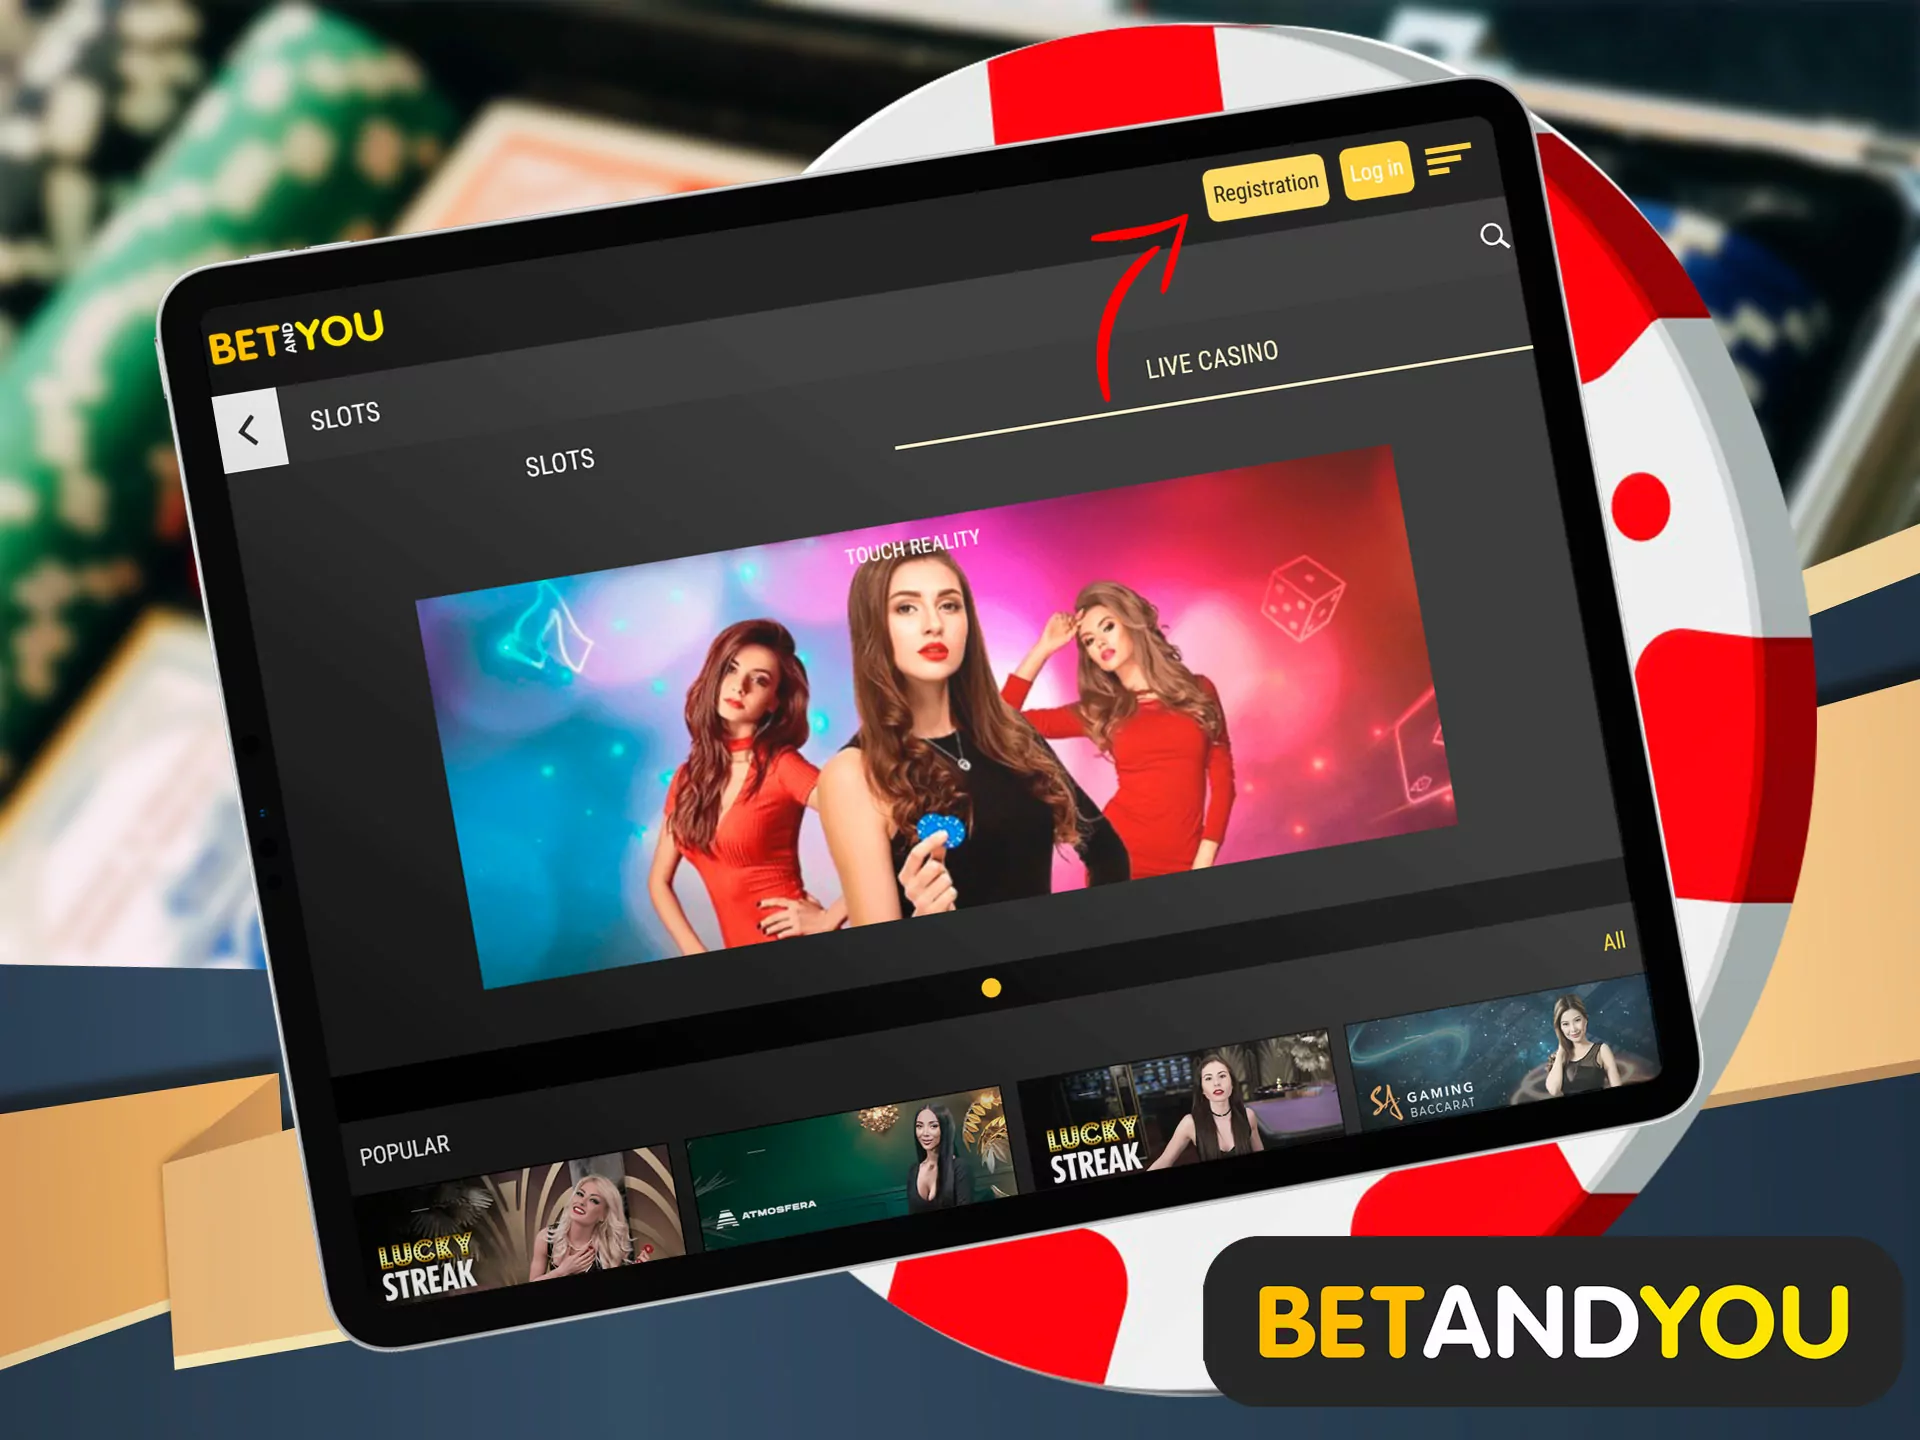 Start the account creation process by visiting the official Betandyou Casino page, then click on the orange "Register" button.